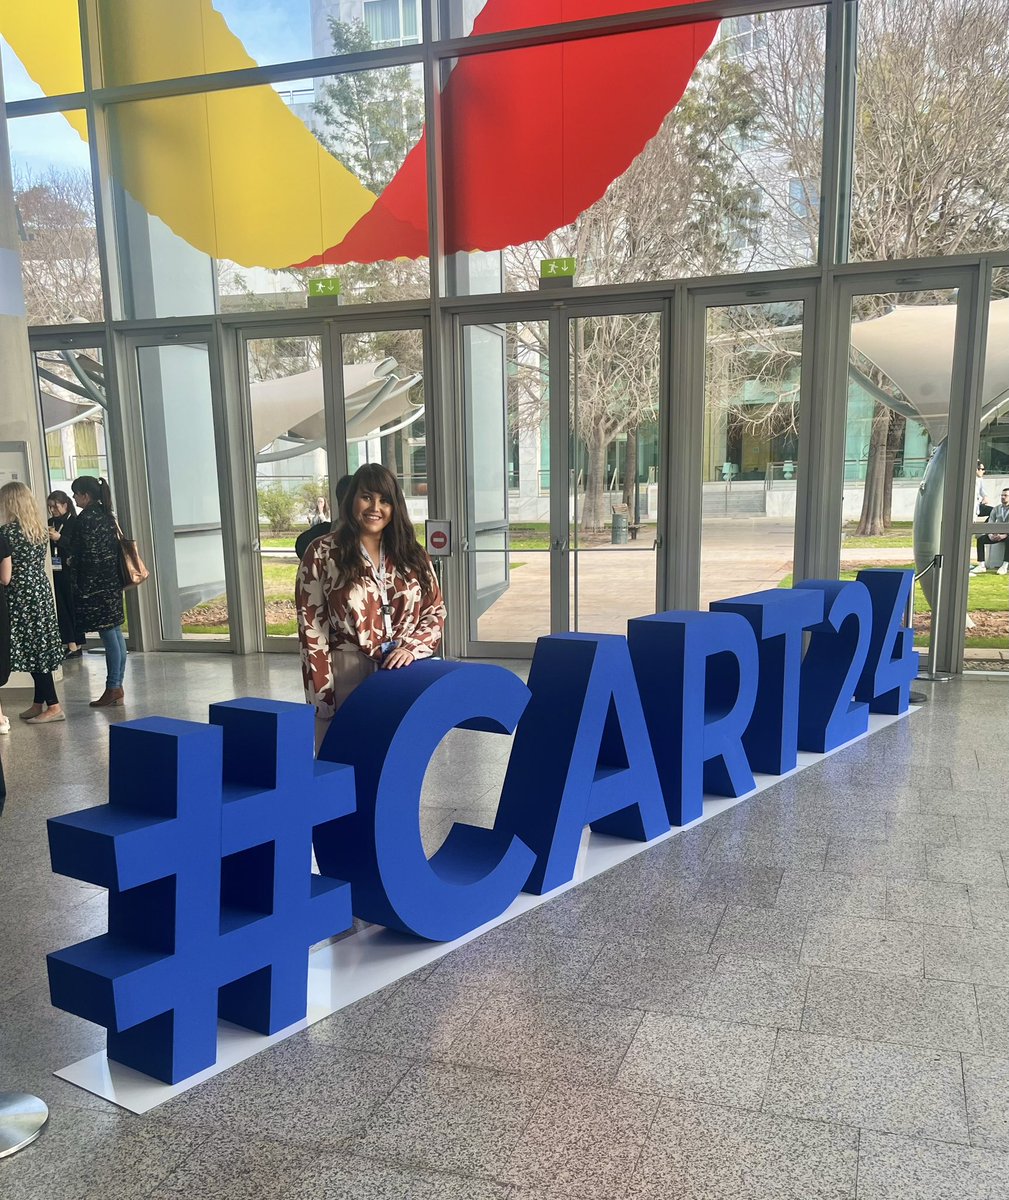 Grateful to be in Valencia for #CART24 - first day full of insightful talks and still so much to learn in the world of CAR-T! @AnthonyNolan